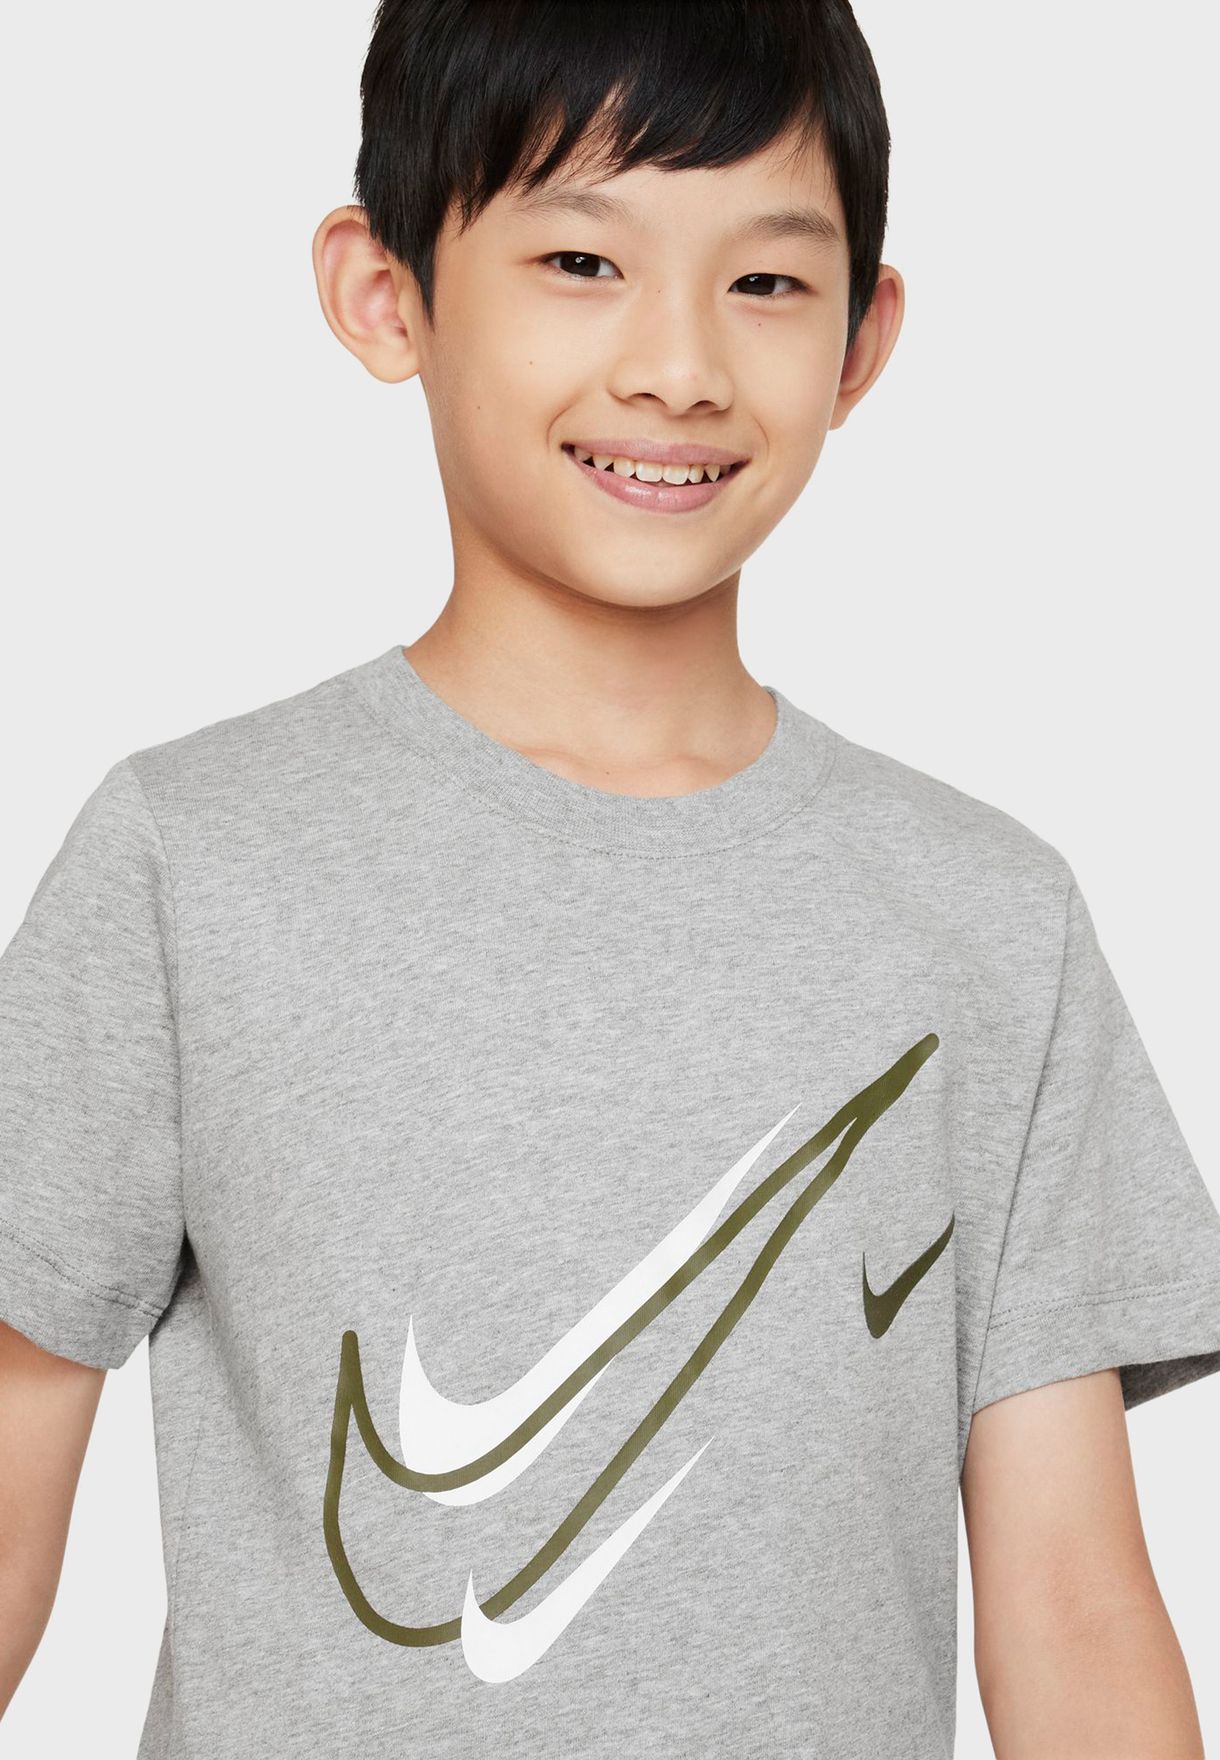 Youth Nsw T-Shirt